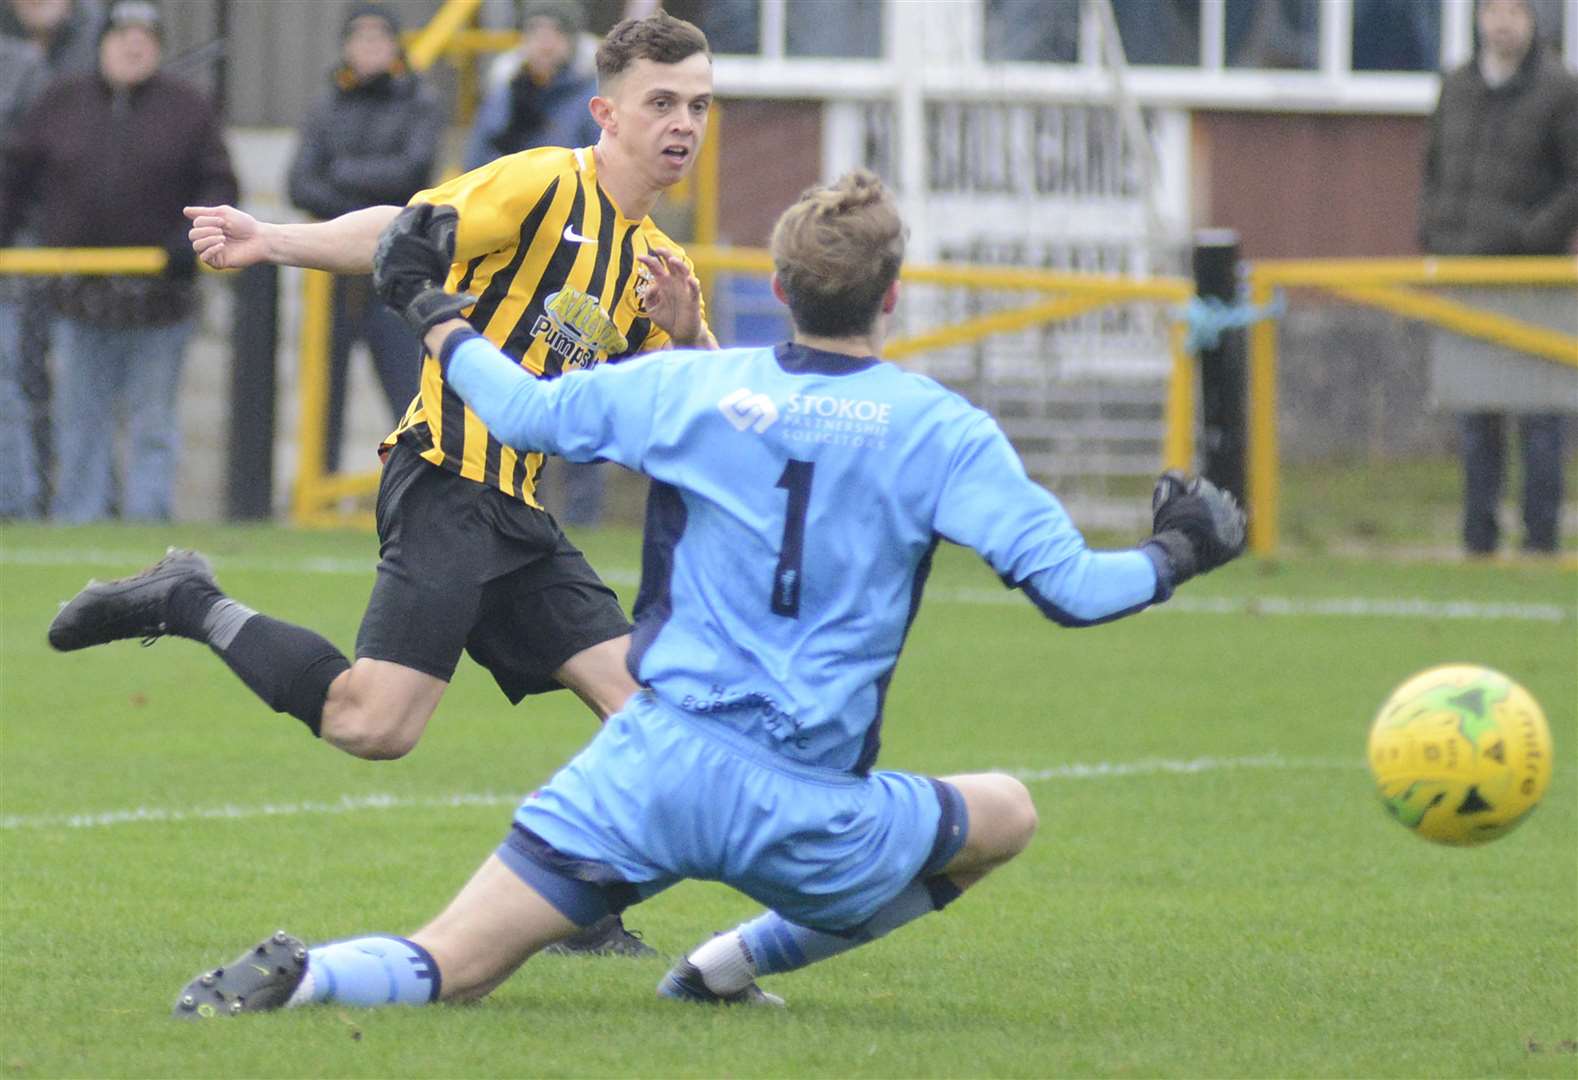 Folkestone's Johan ter Horst was unable to convert this chance against Haringey Picture: Paul Amos